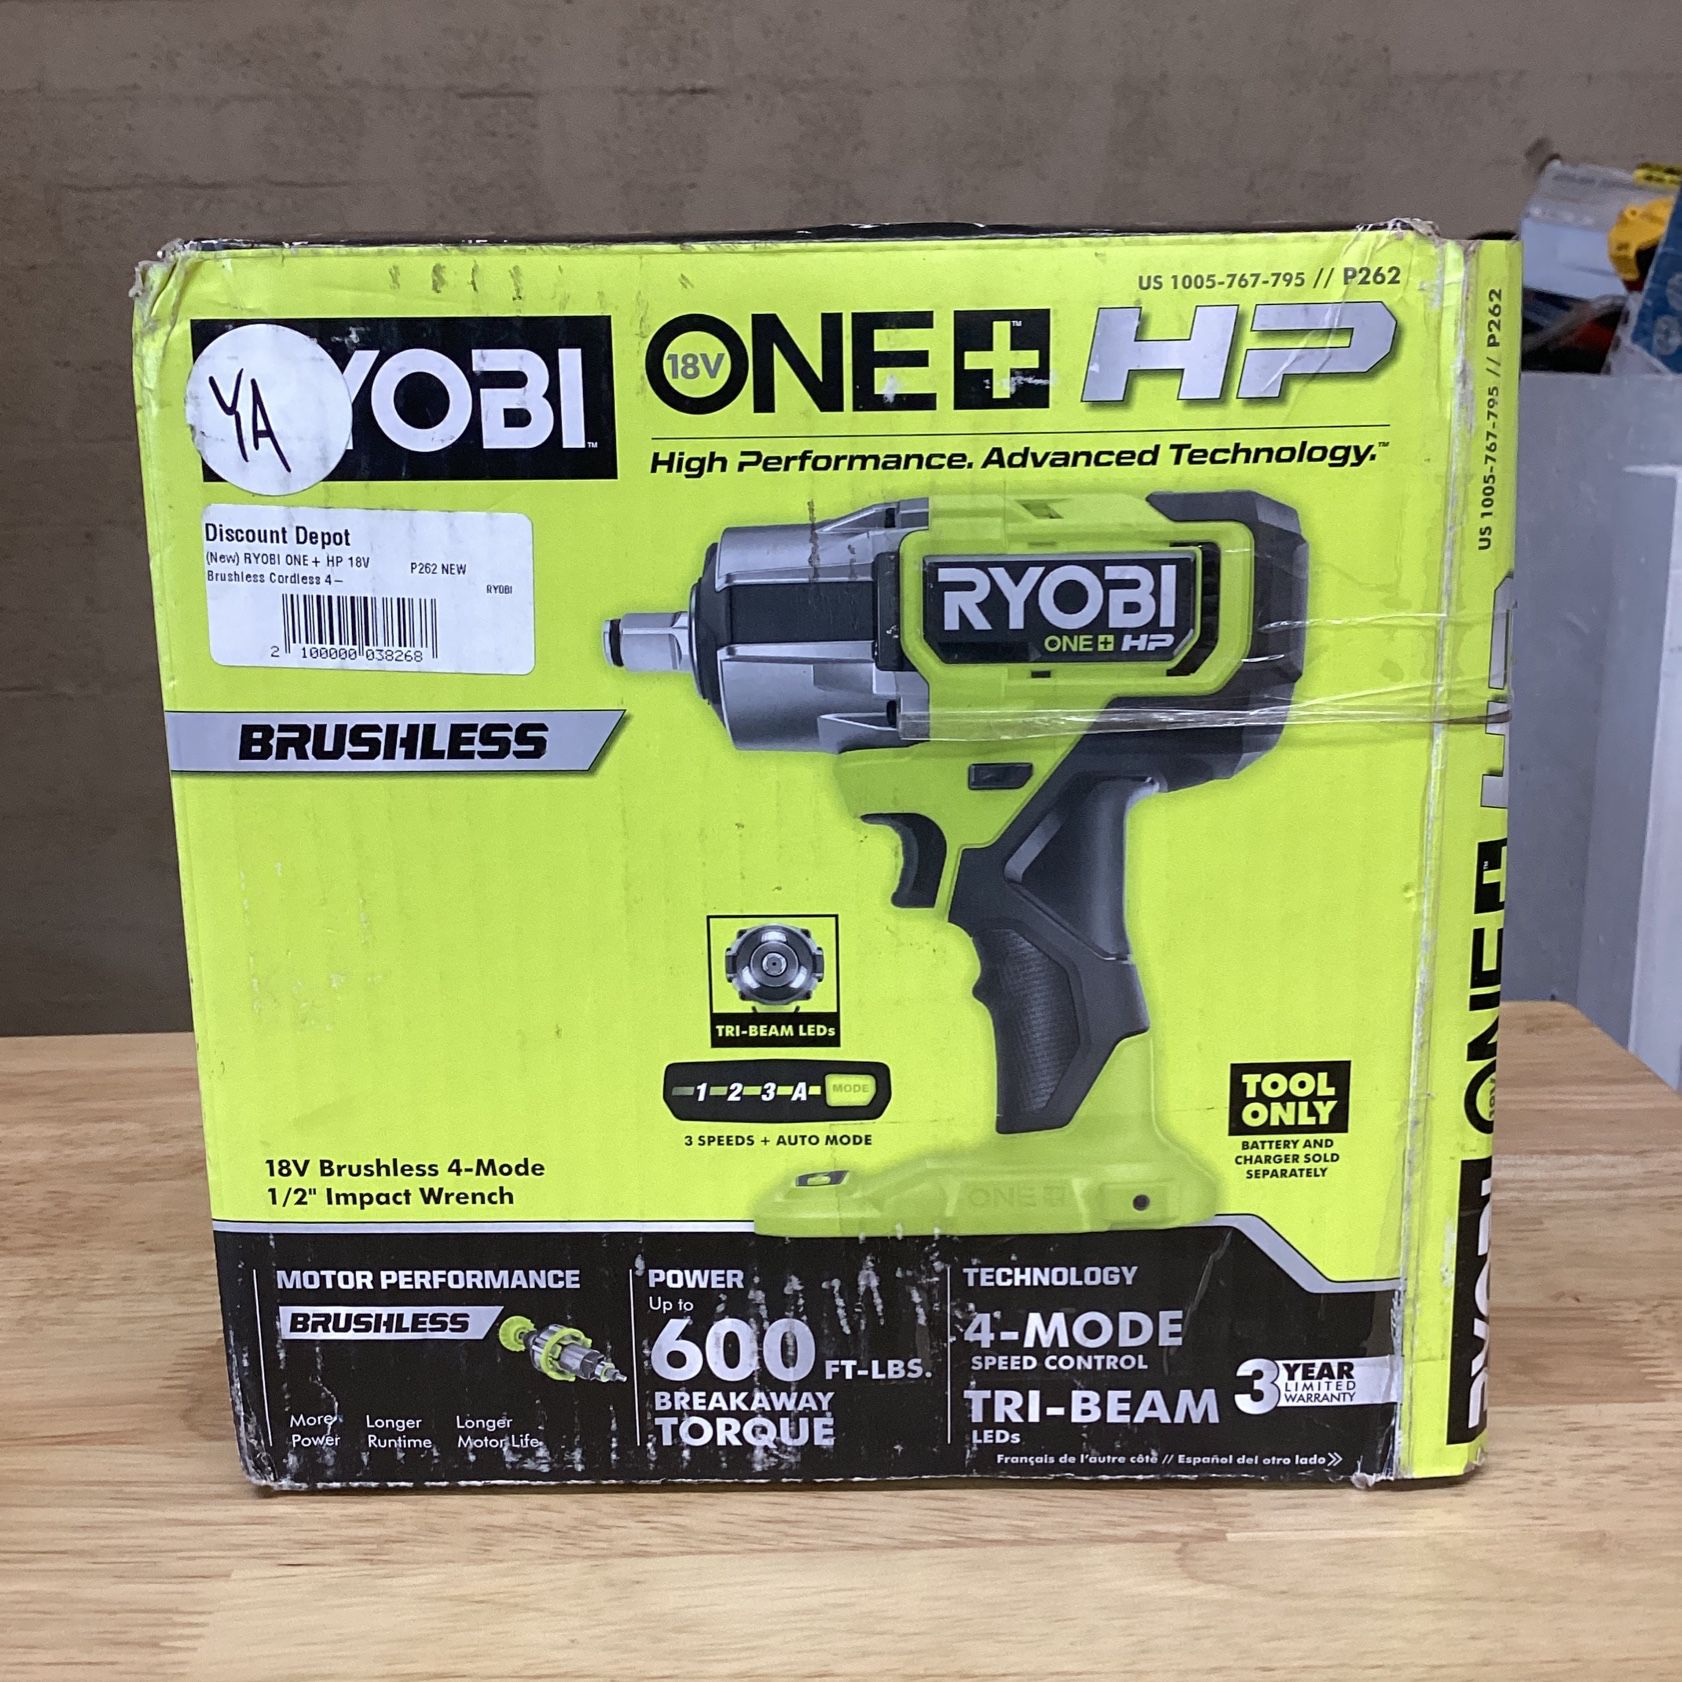 (New) RYOBI ONE+ HP 18V Brushless Cordless 4-Mode 1/2 in. Impact Wrench (Tool Only)